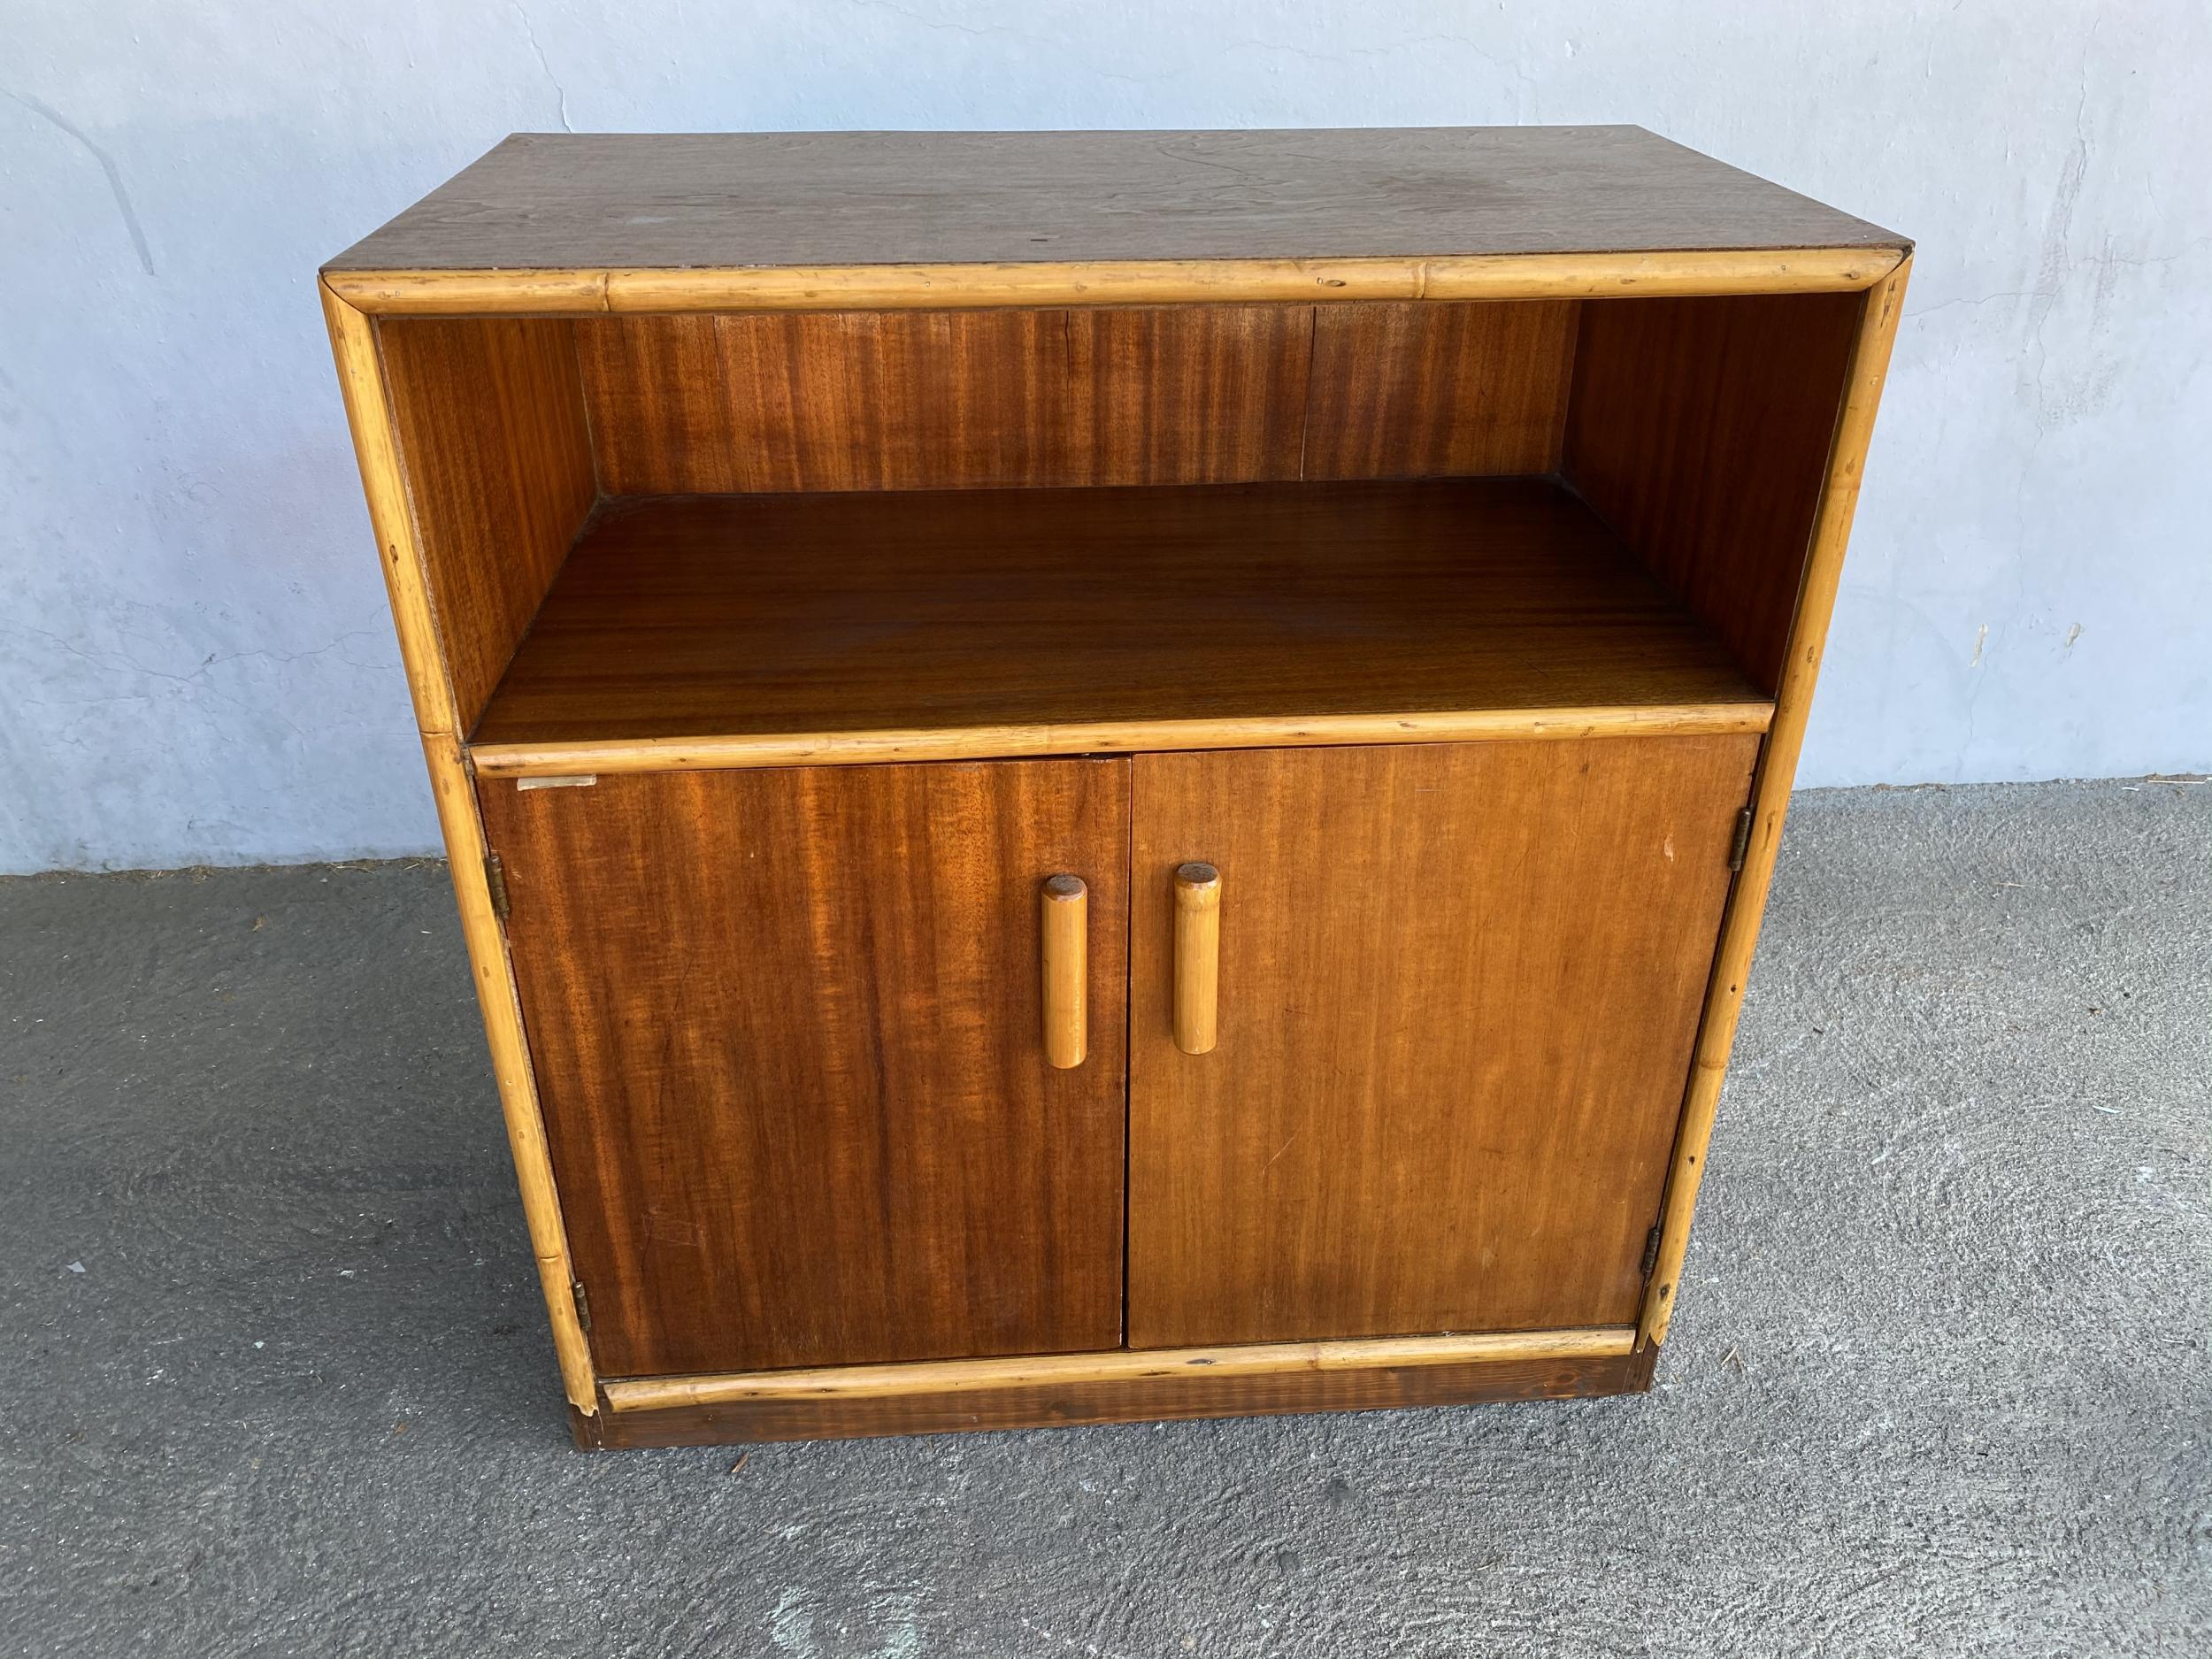 Restored Post War mahogany cabinet with rattan accents featuring a rattan trim with single shelf cubby space and a 2 door cabinet underneath which opens to two fixed shelves.

Restored to new for you.

All rattan, bamboo, and wicker furniture